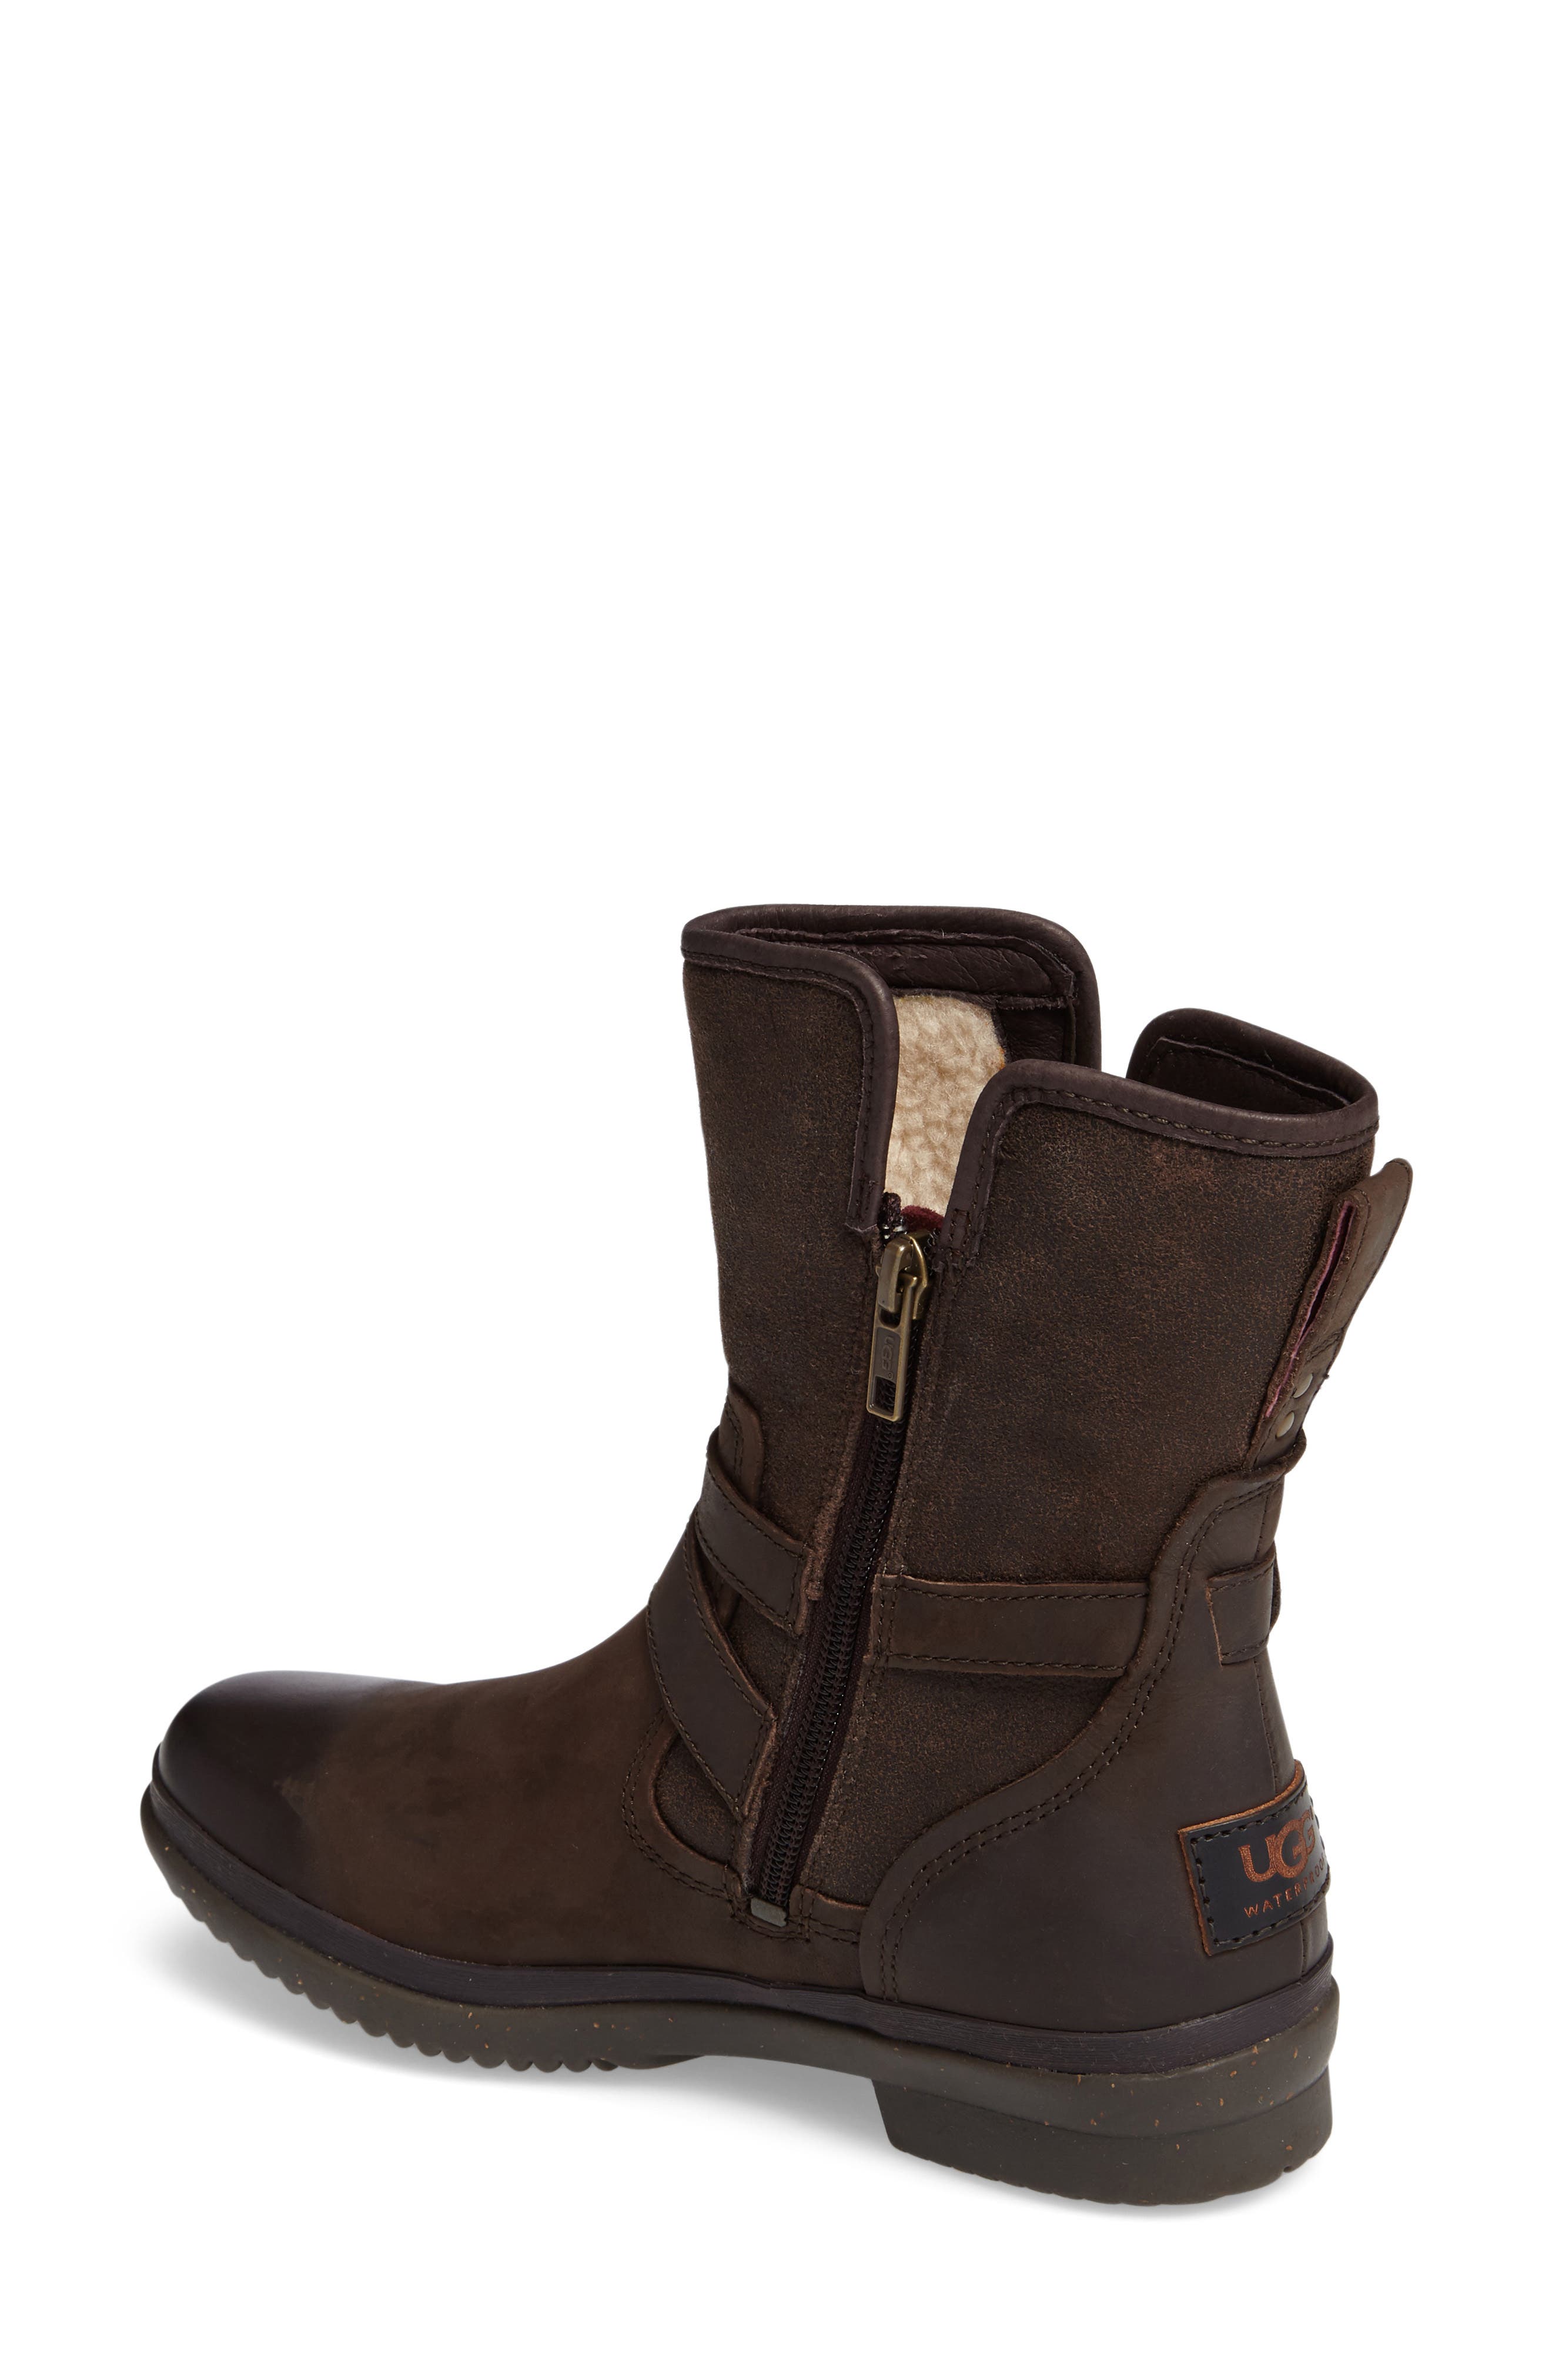 simmens waterproof leather boot